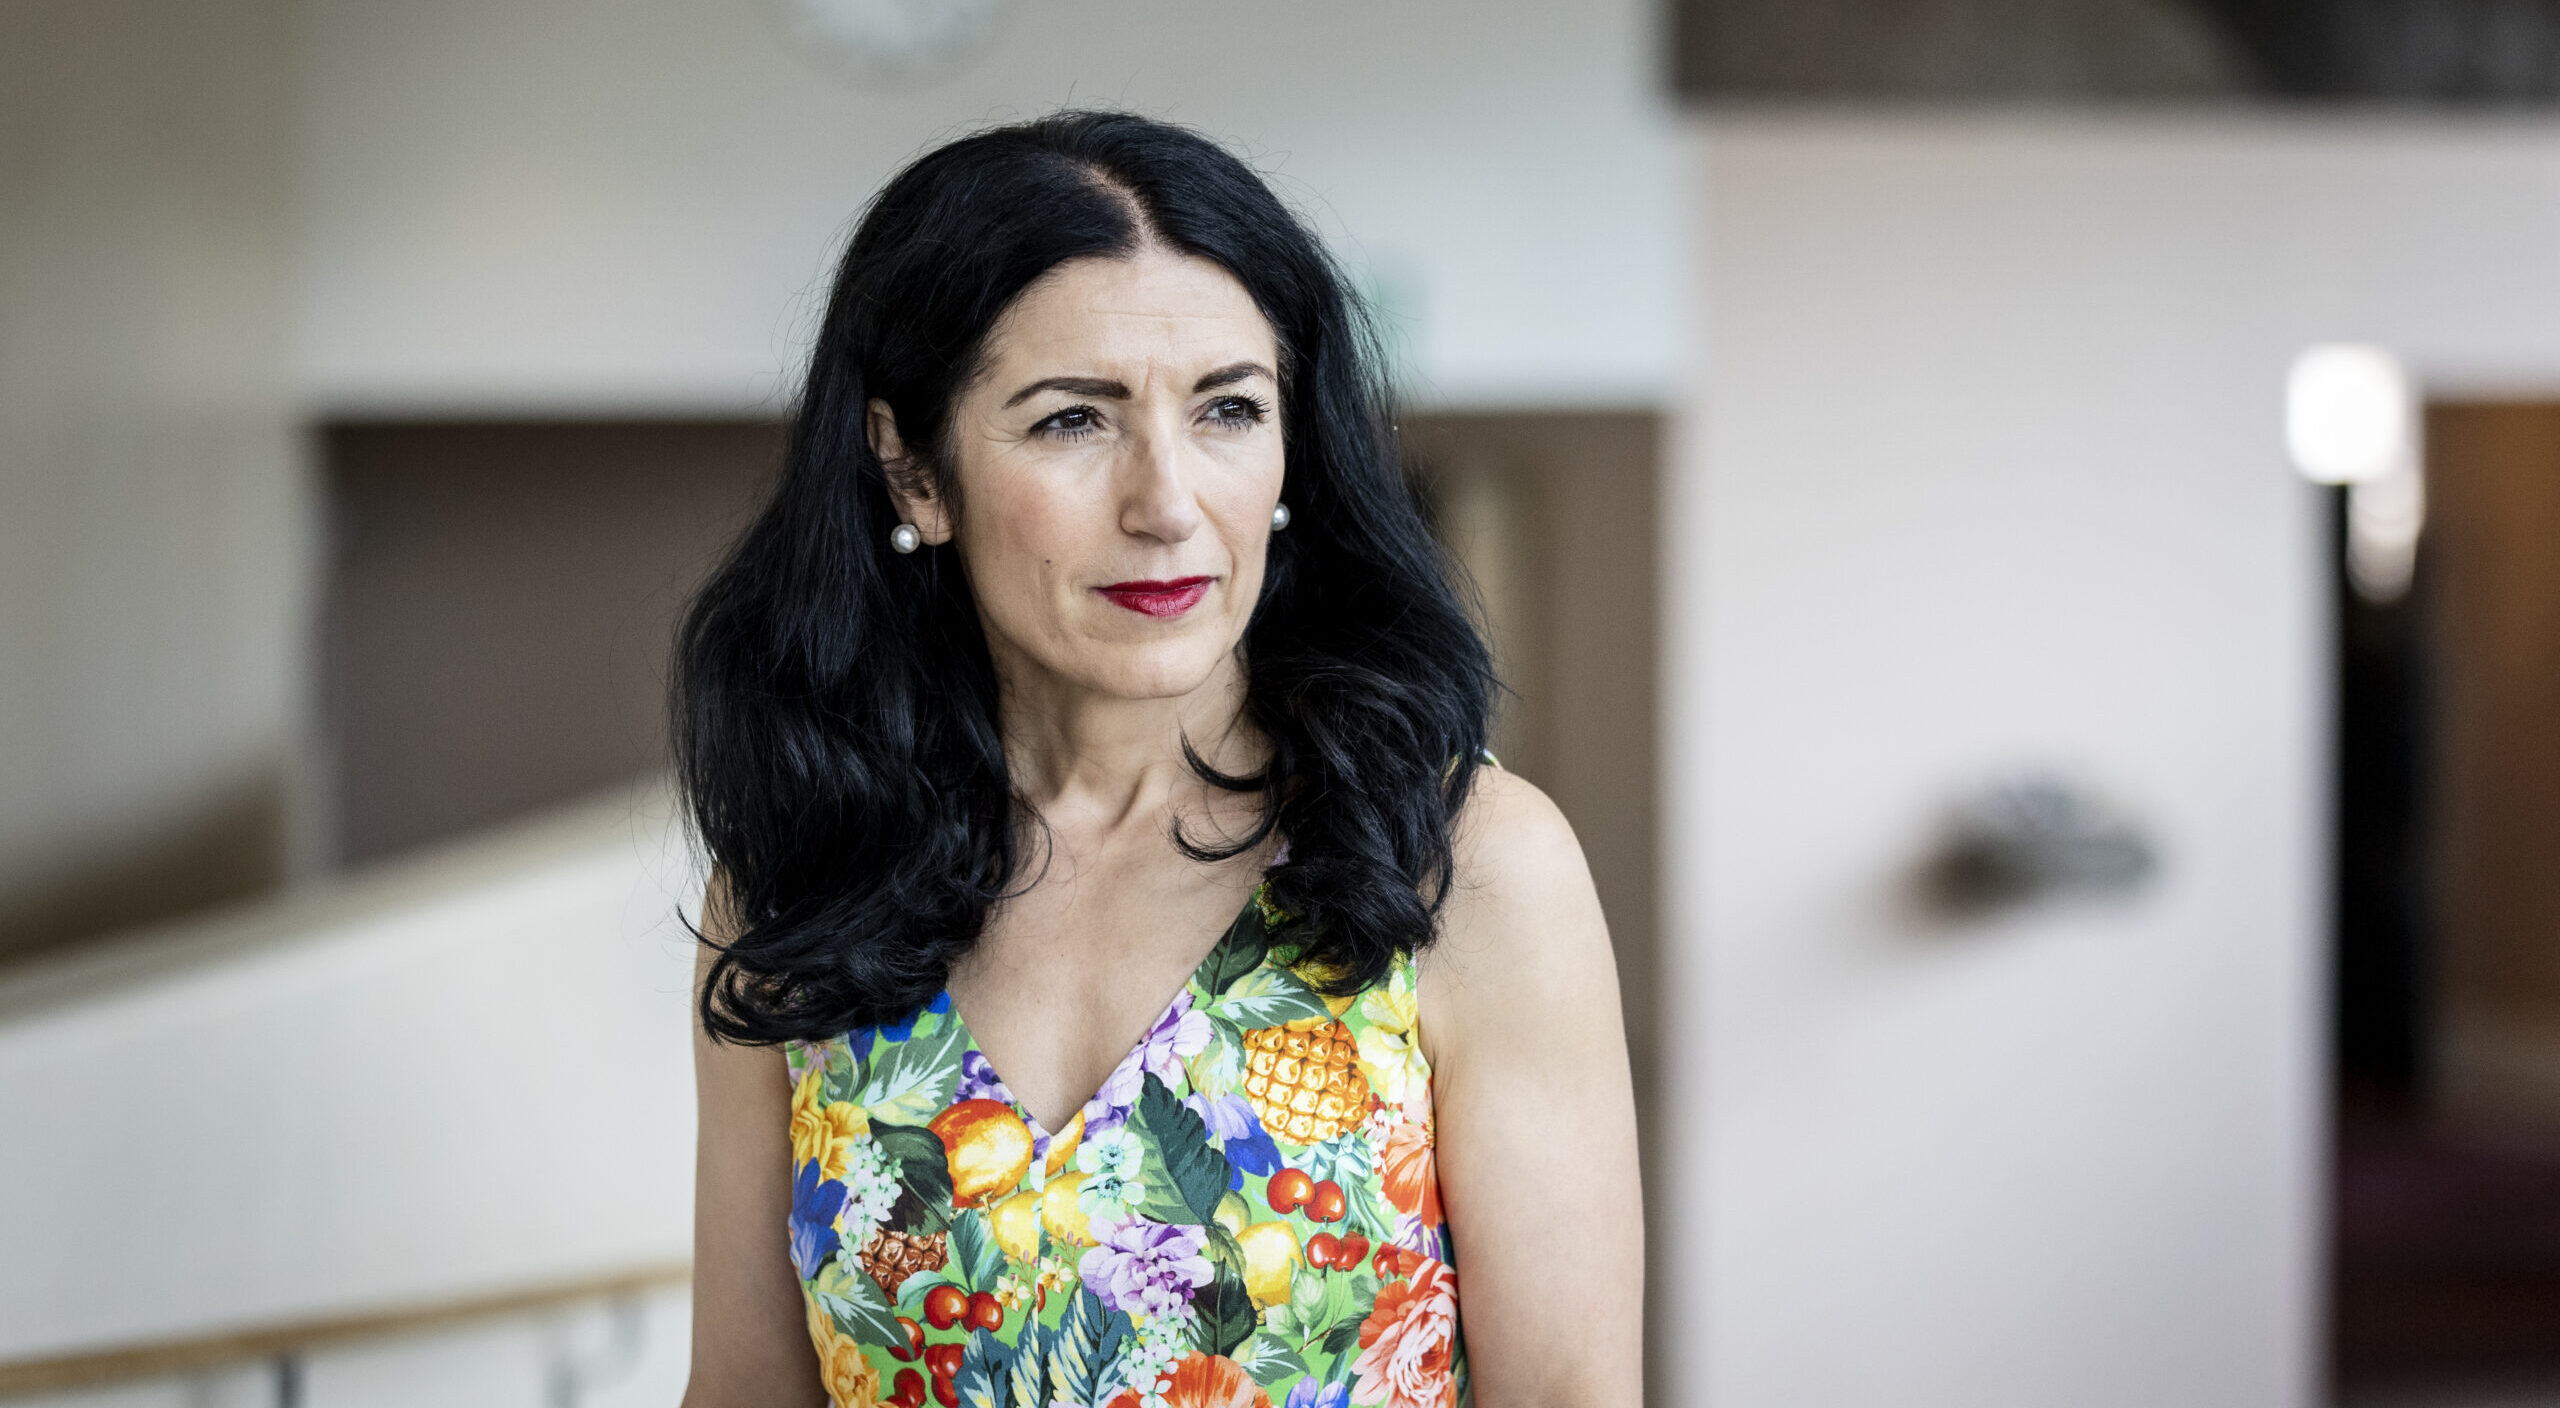 Photograph of Kurdish exile and former Swedish Parliament member Amineh Kakabaveh, a woman in her early 50s with black wavy hair below her shoulders. She's wearing red lipstick and pearl earrings, and a colorful dress with a pattern of various fruits and flowers. She is looking off to the right.